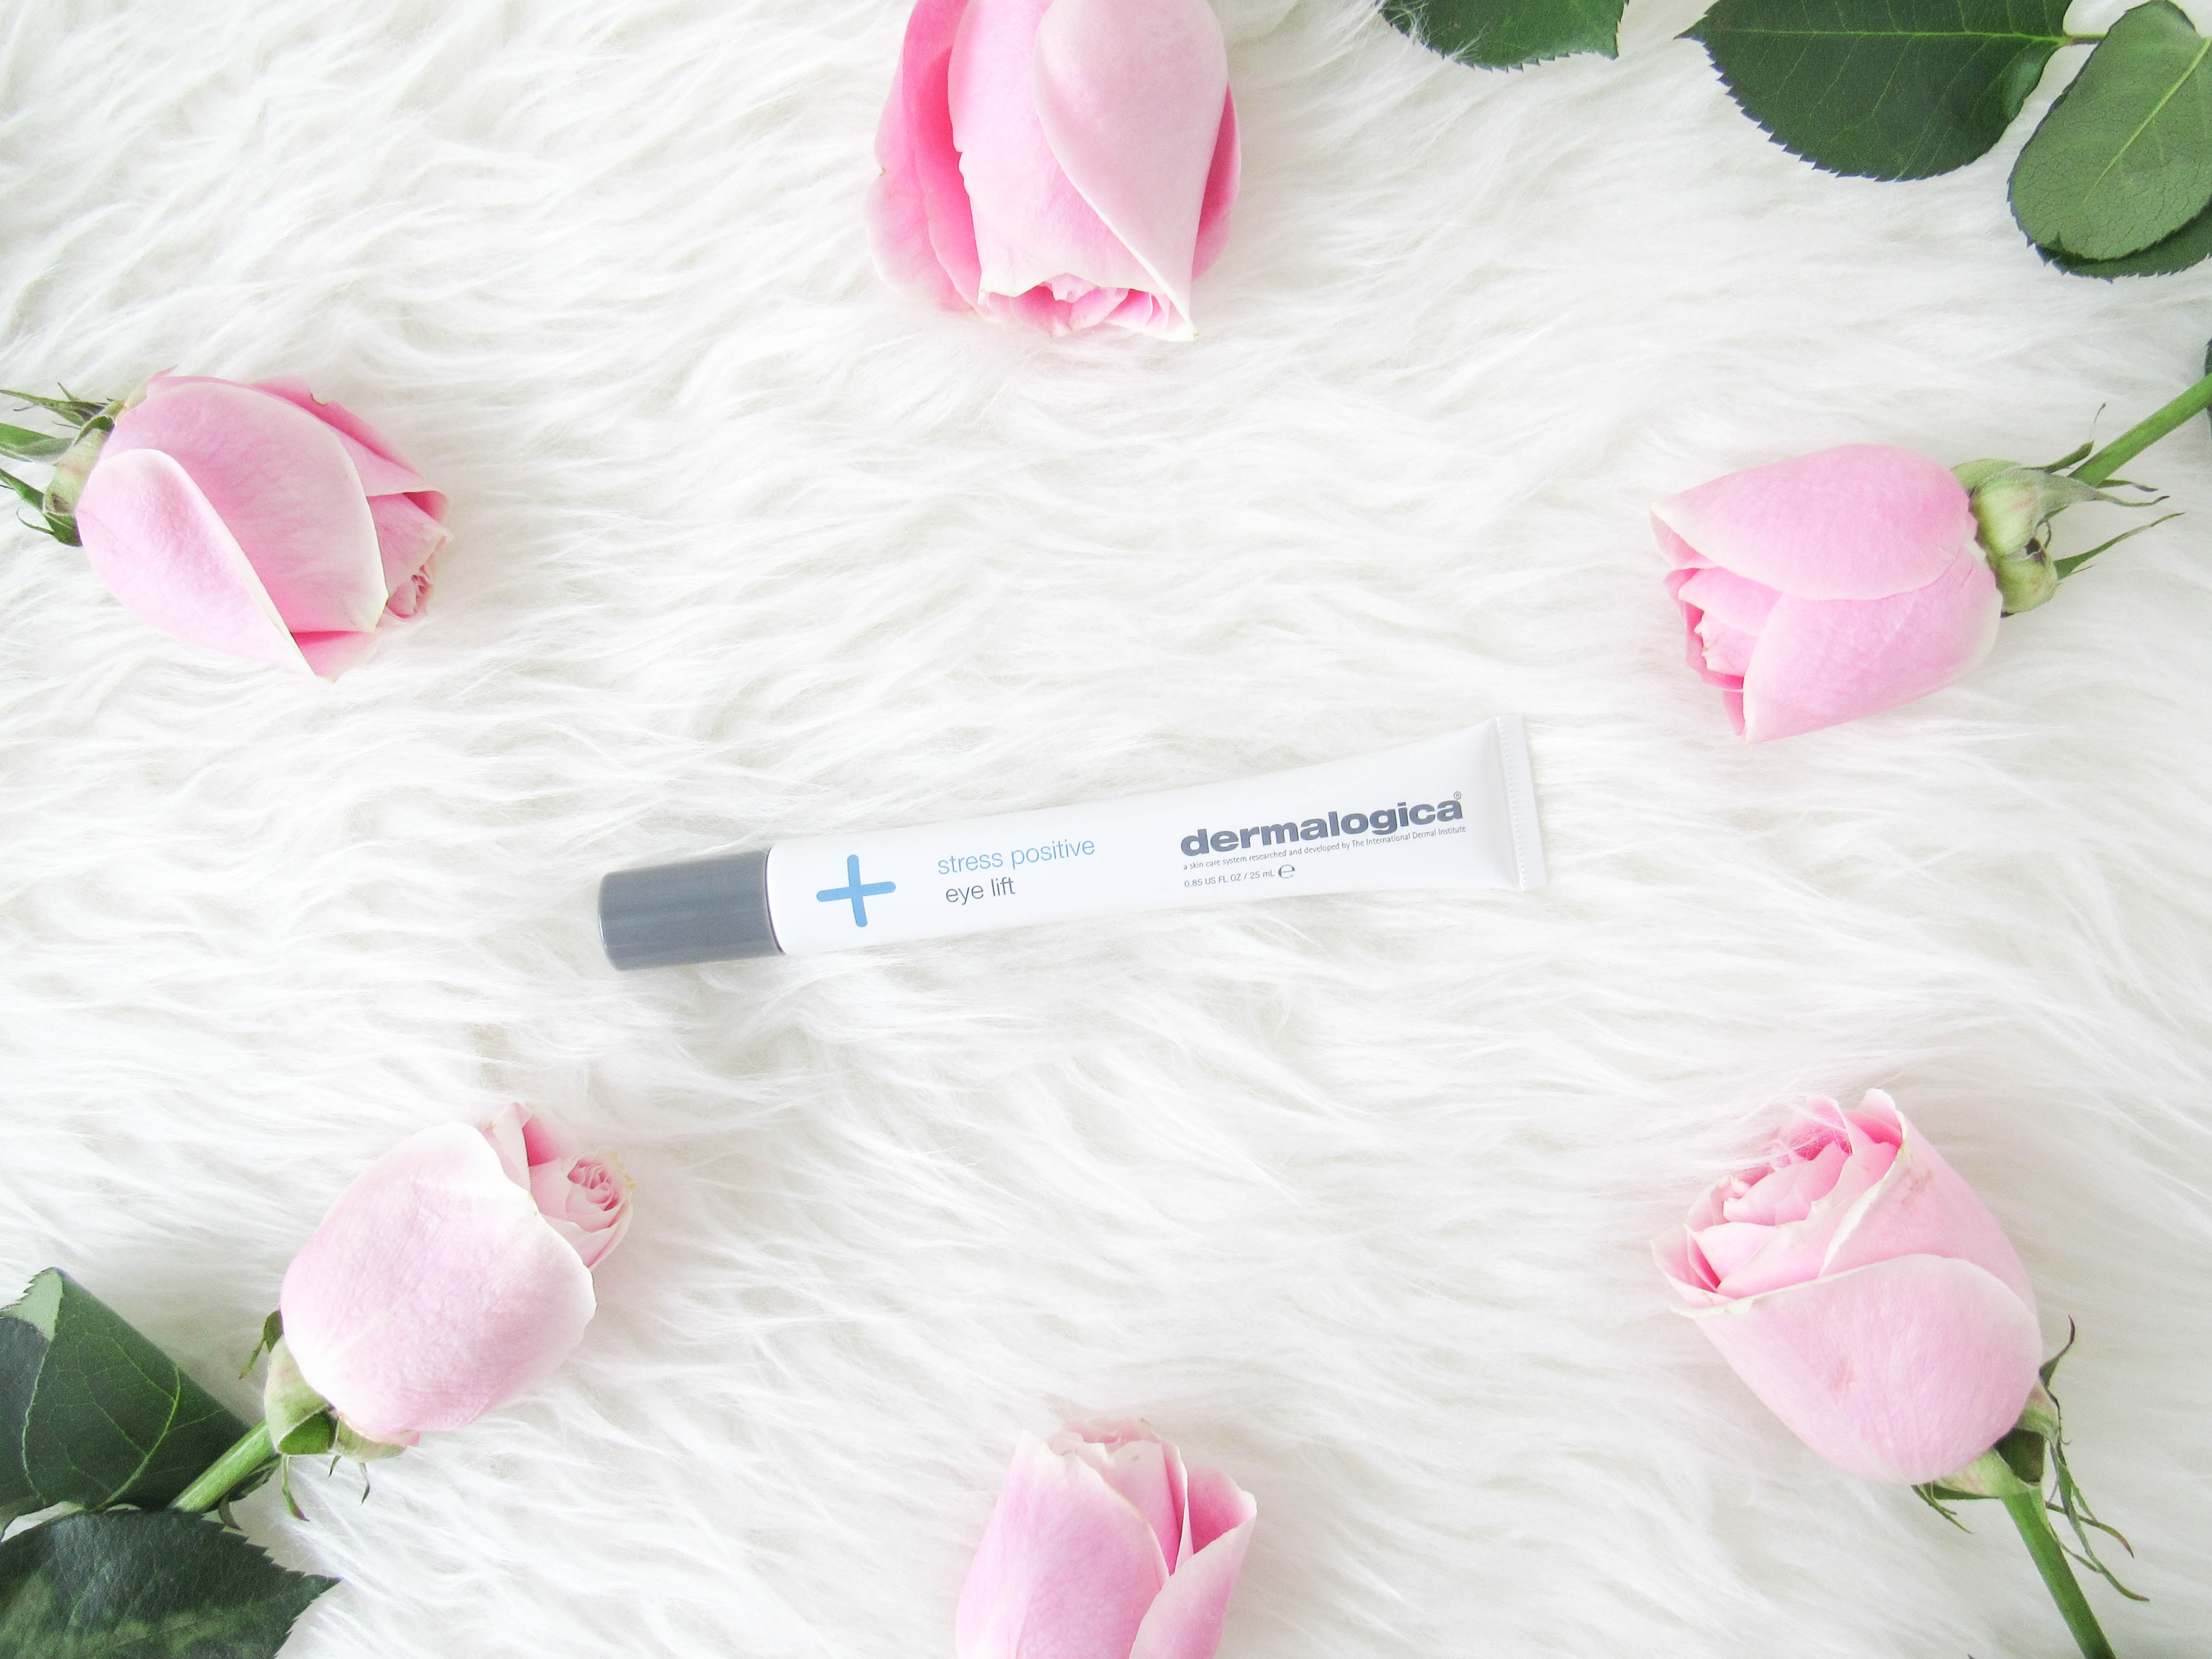 Dermalogica- Review on Livin' Life with Style